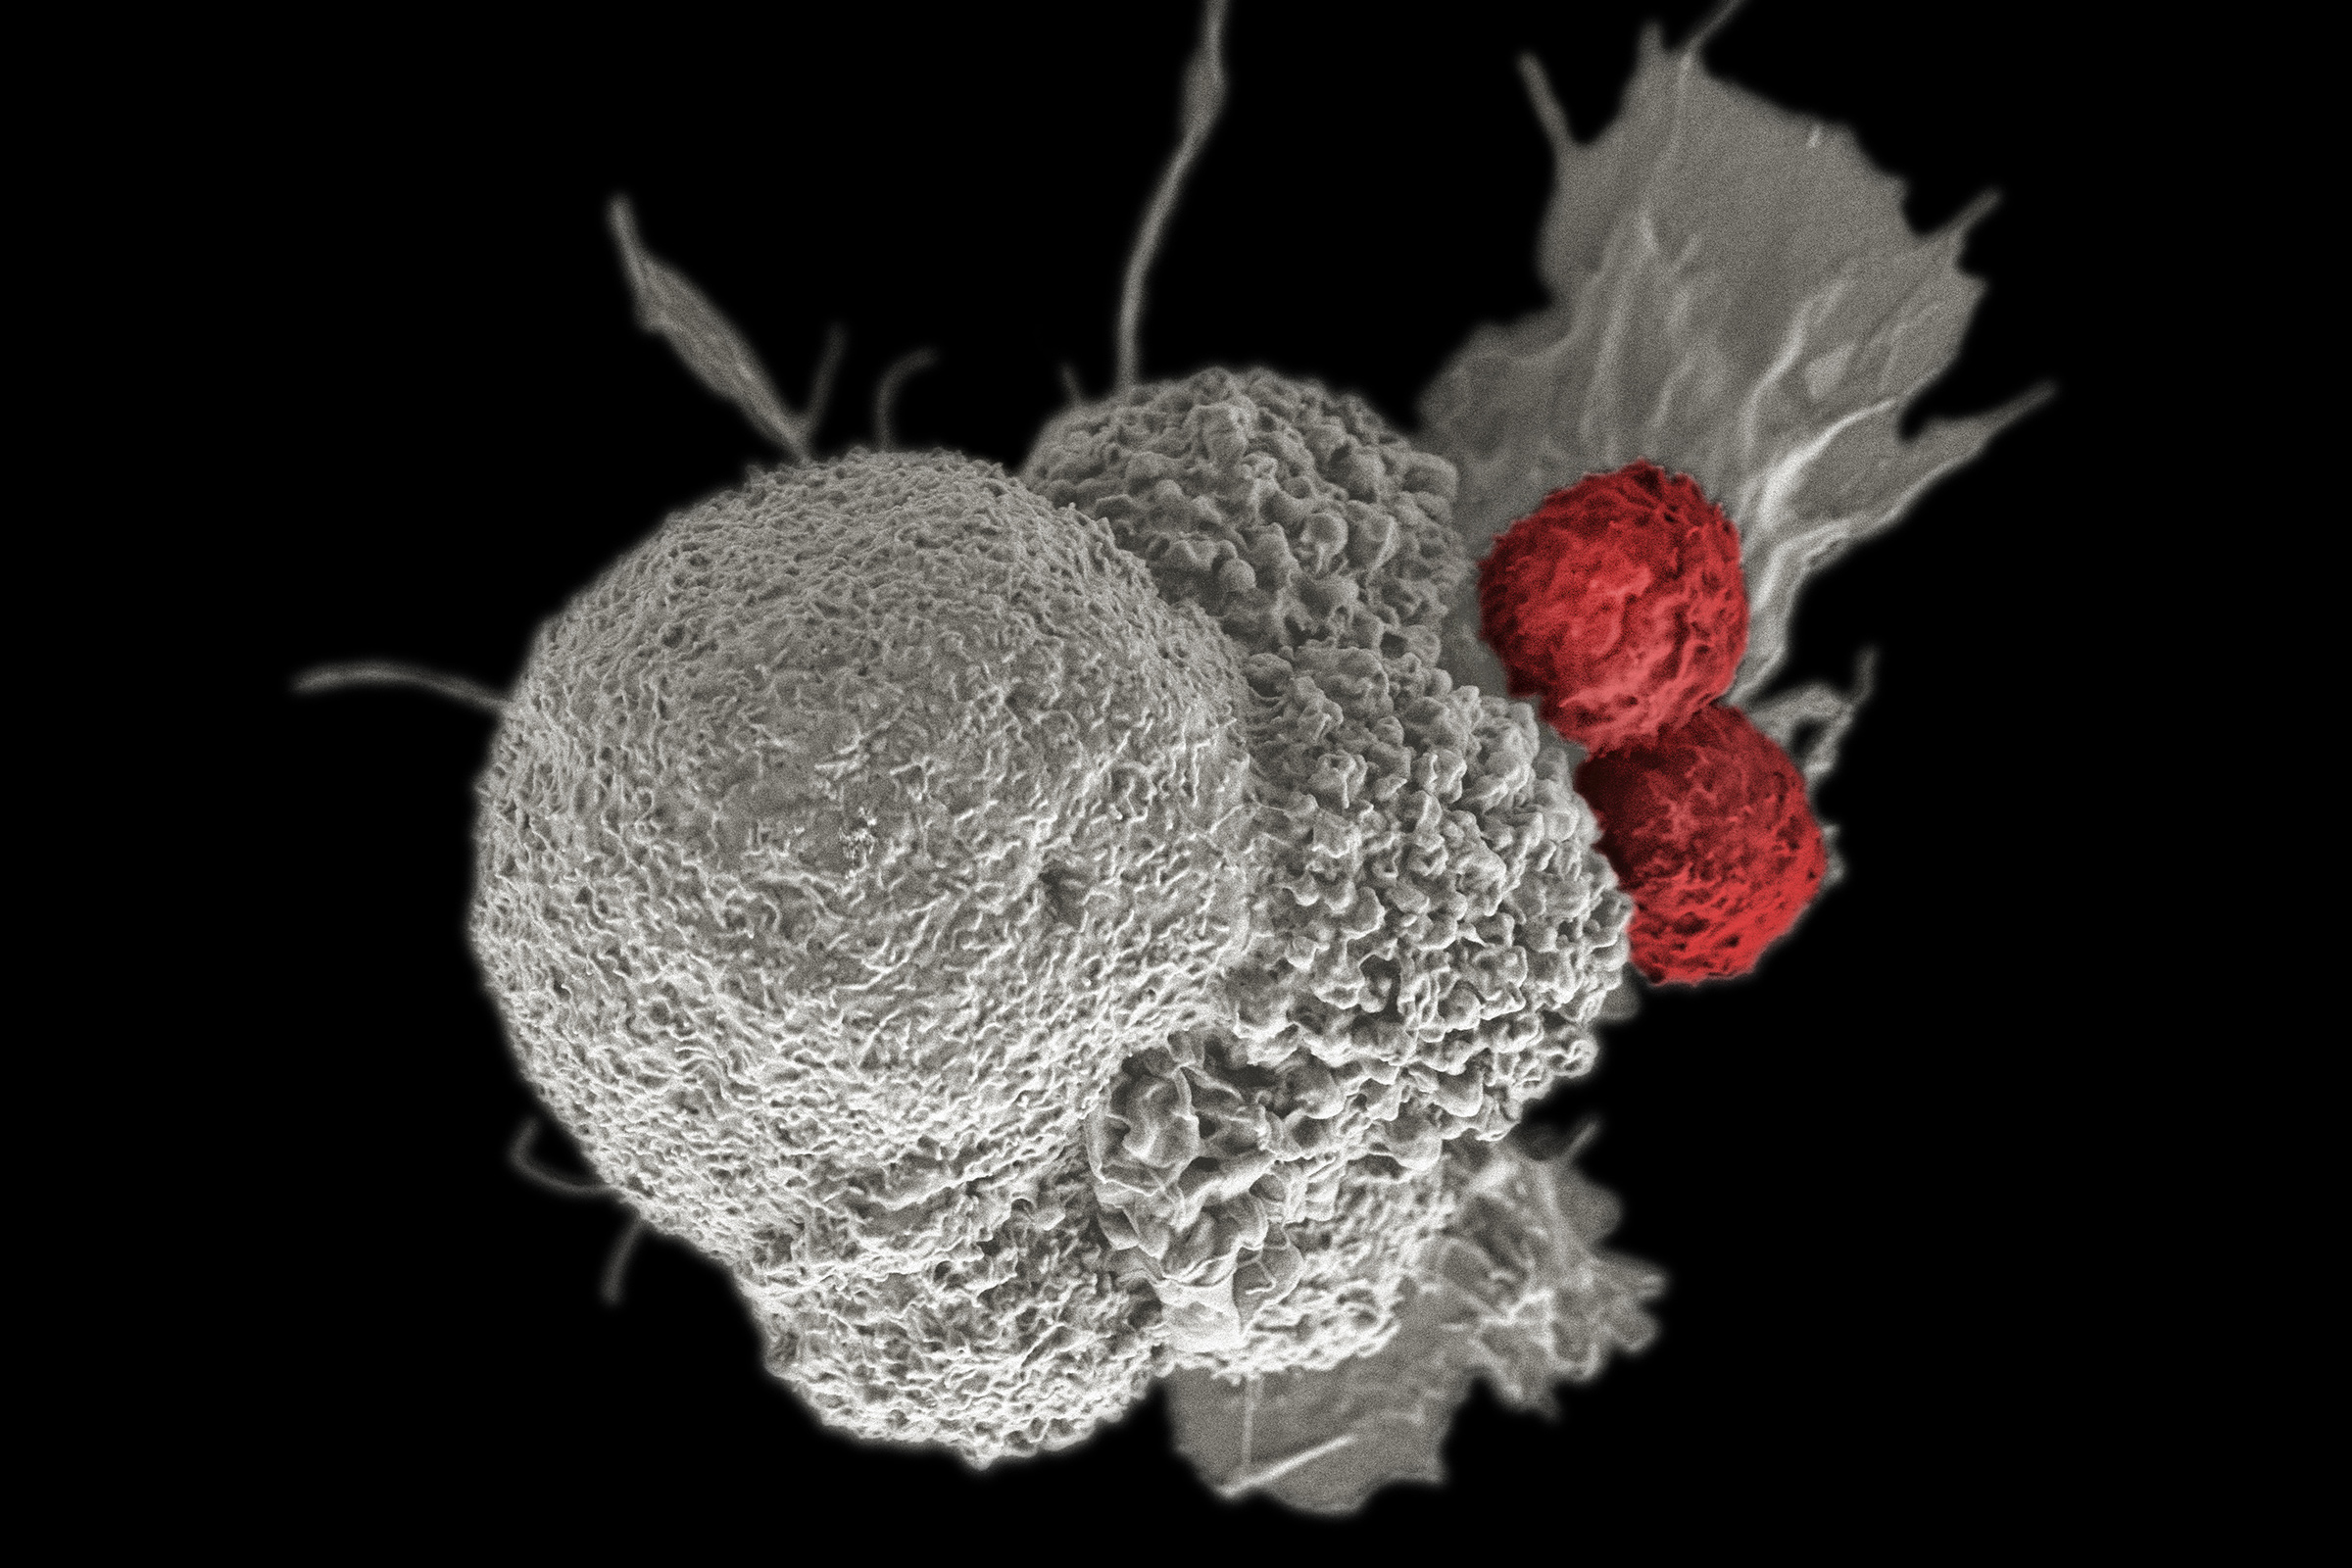 Microscope image of cancer cell with immune cells attached